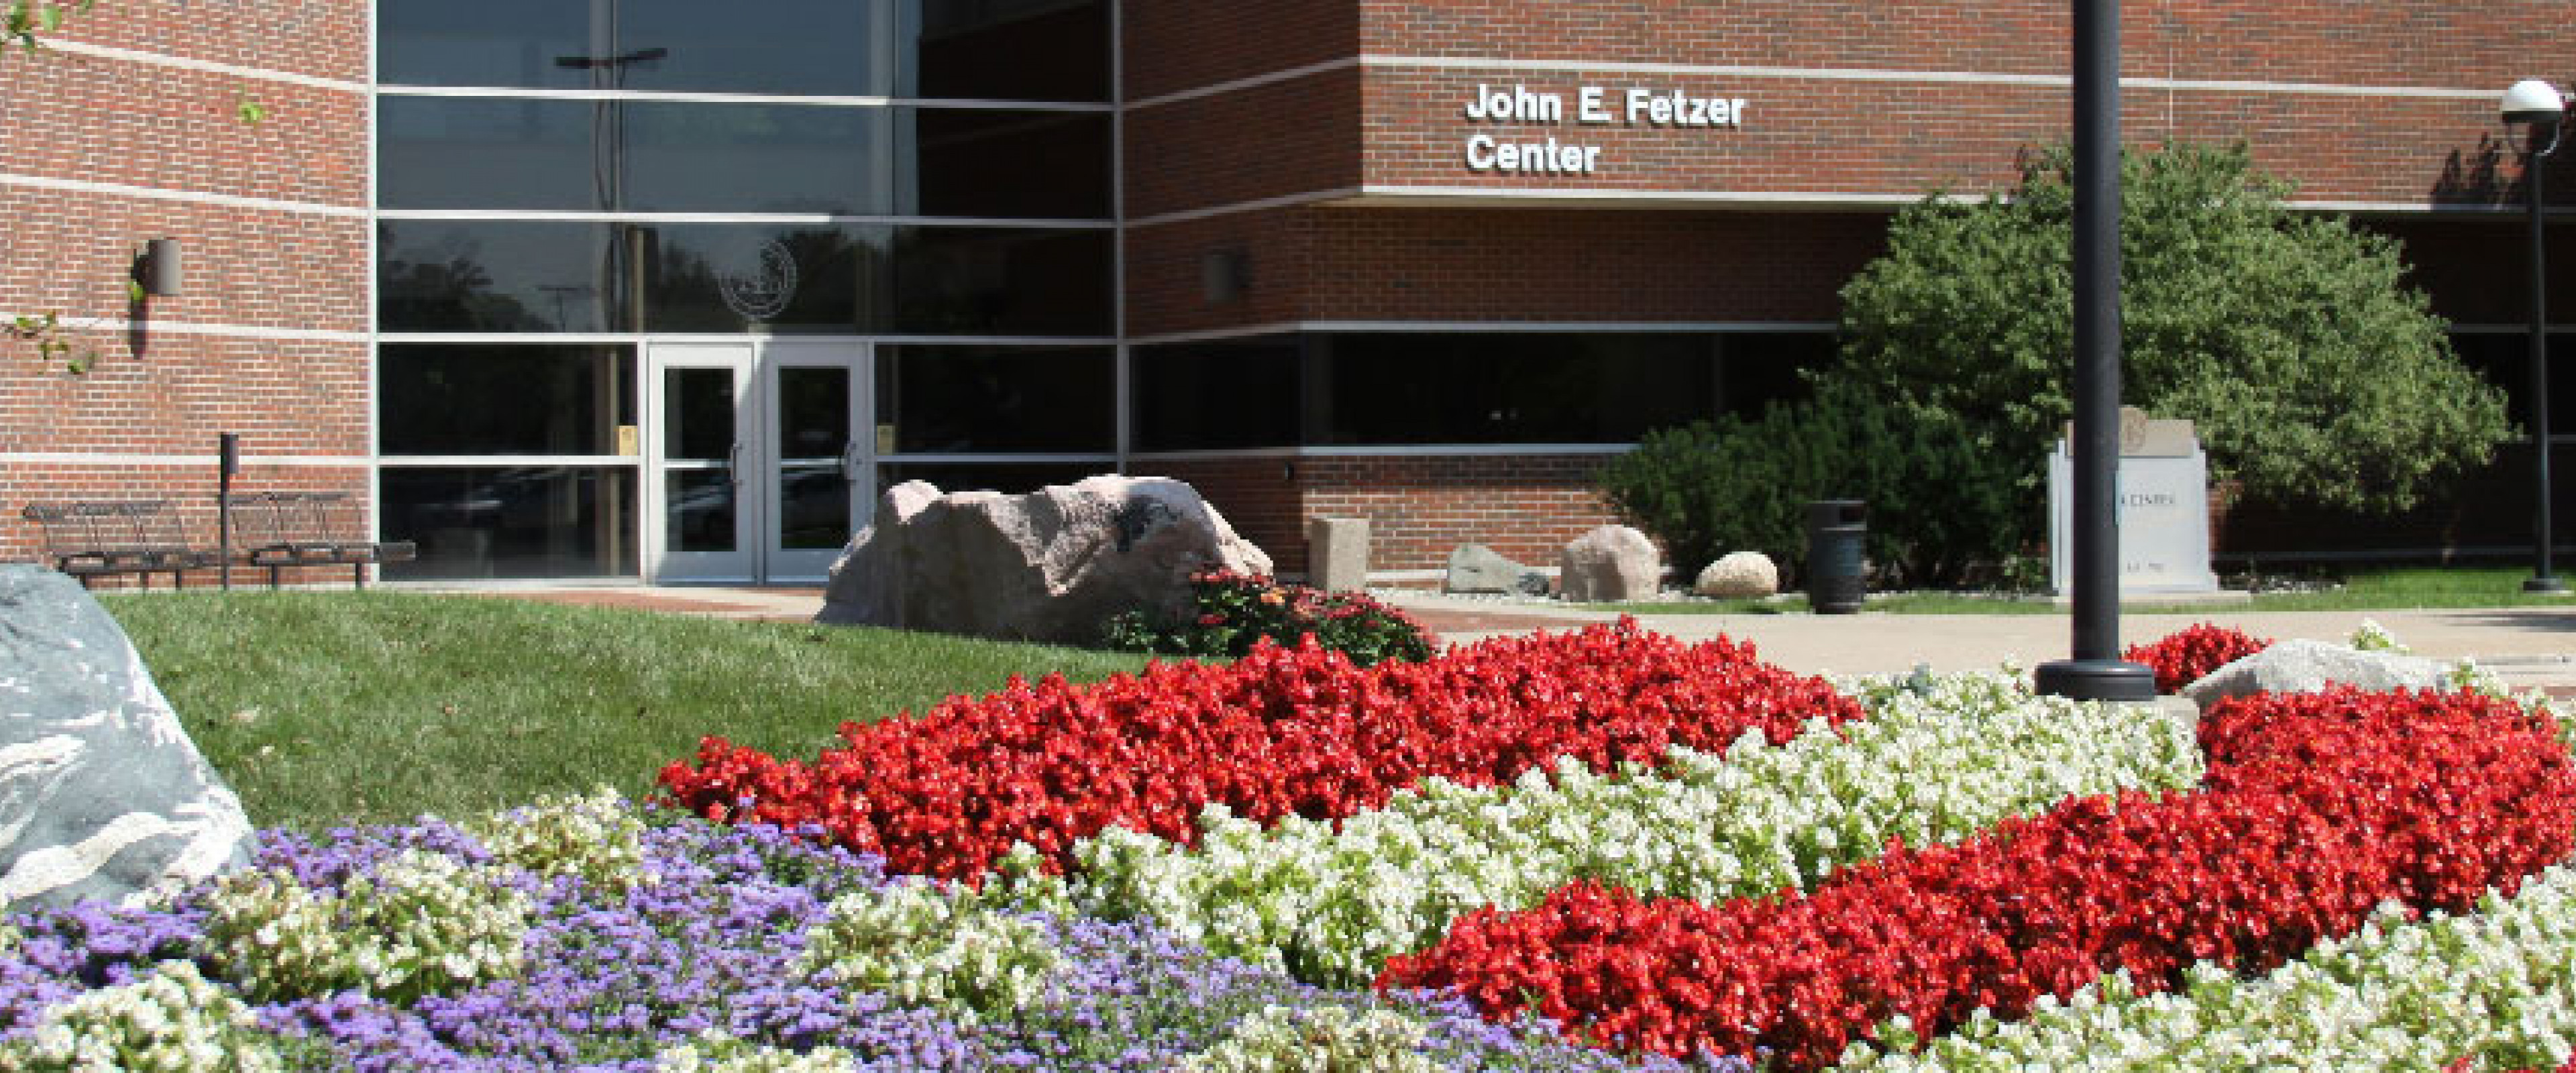 Fetzer building with purple, red and white flowers in front.